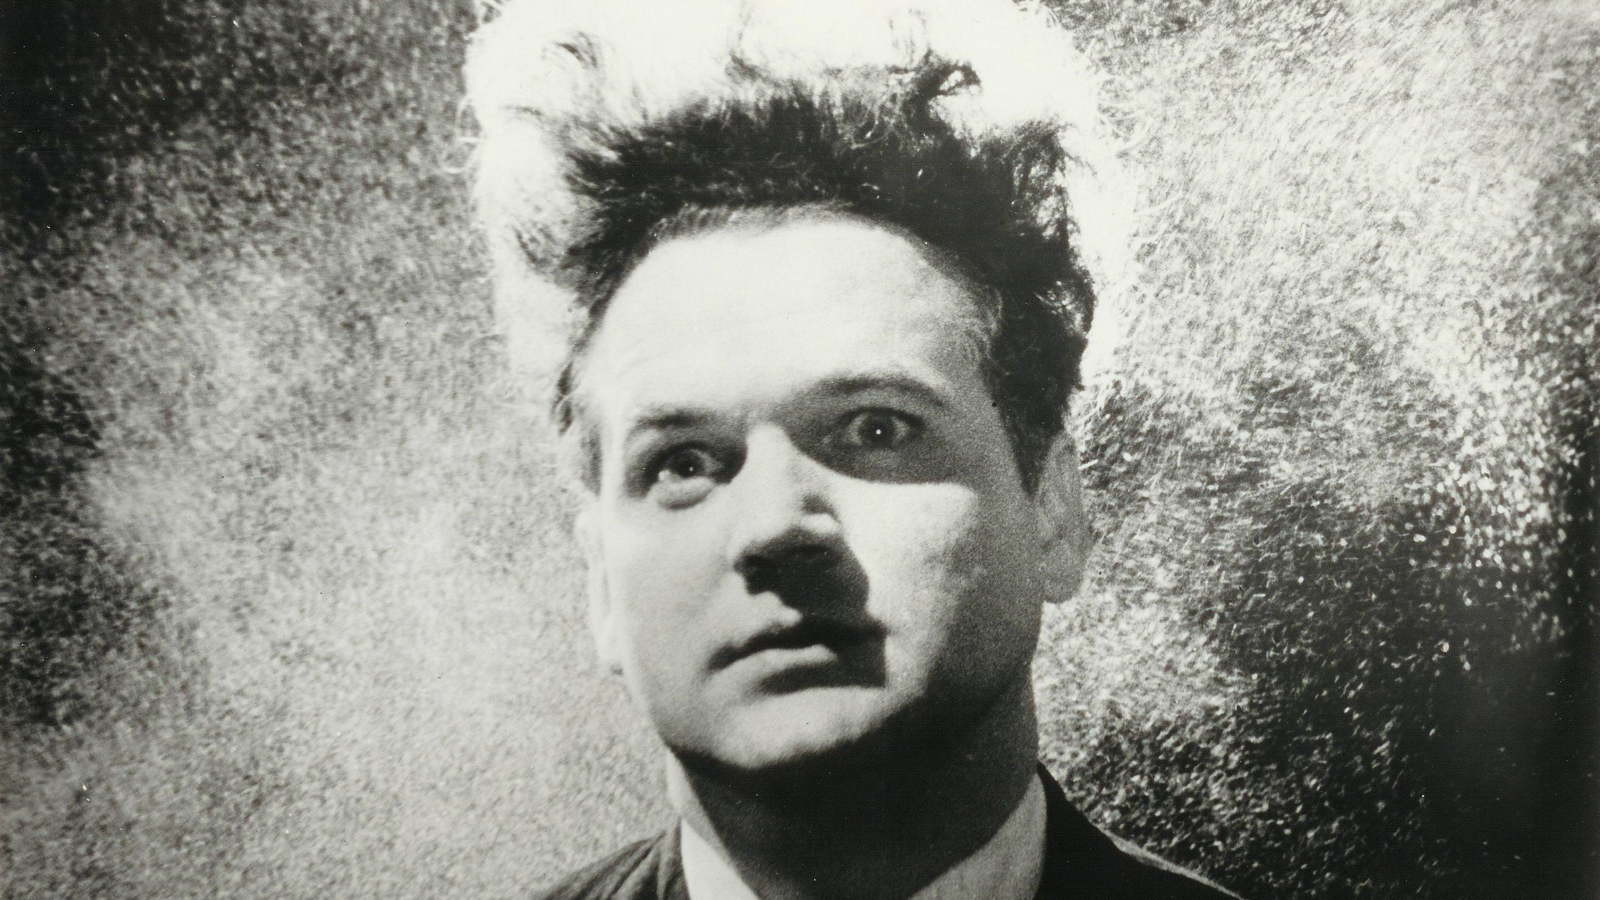 Eraserhead wallpapers, Movie, HQ Eraserhead pictures | 4K Wallpapers 2019